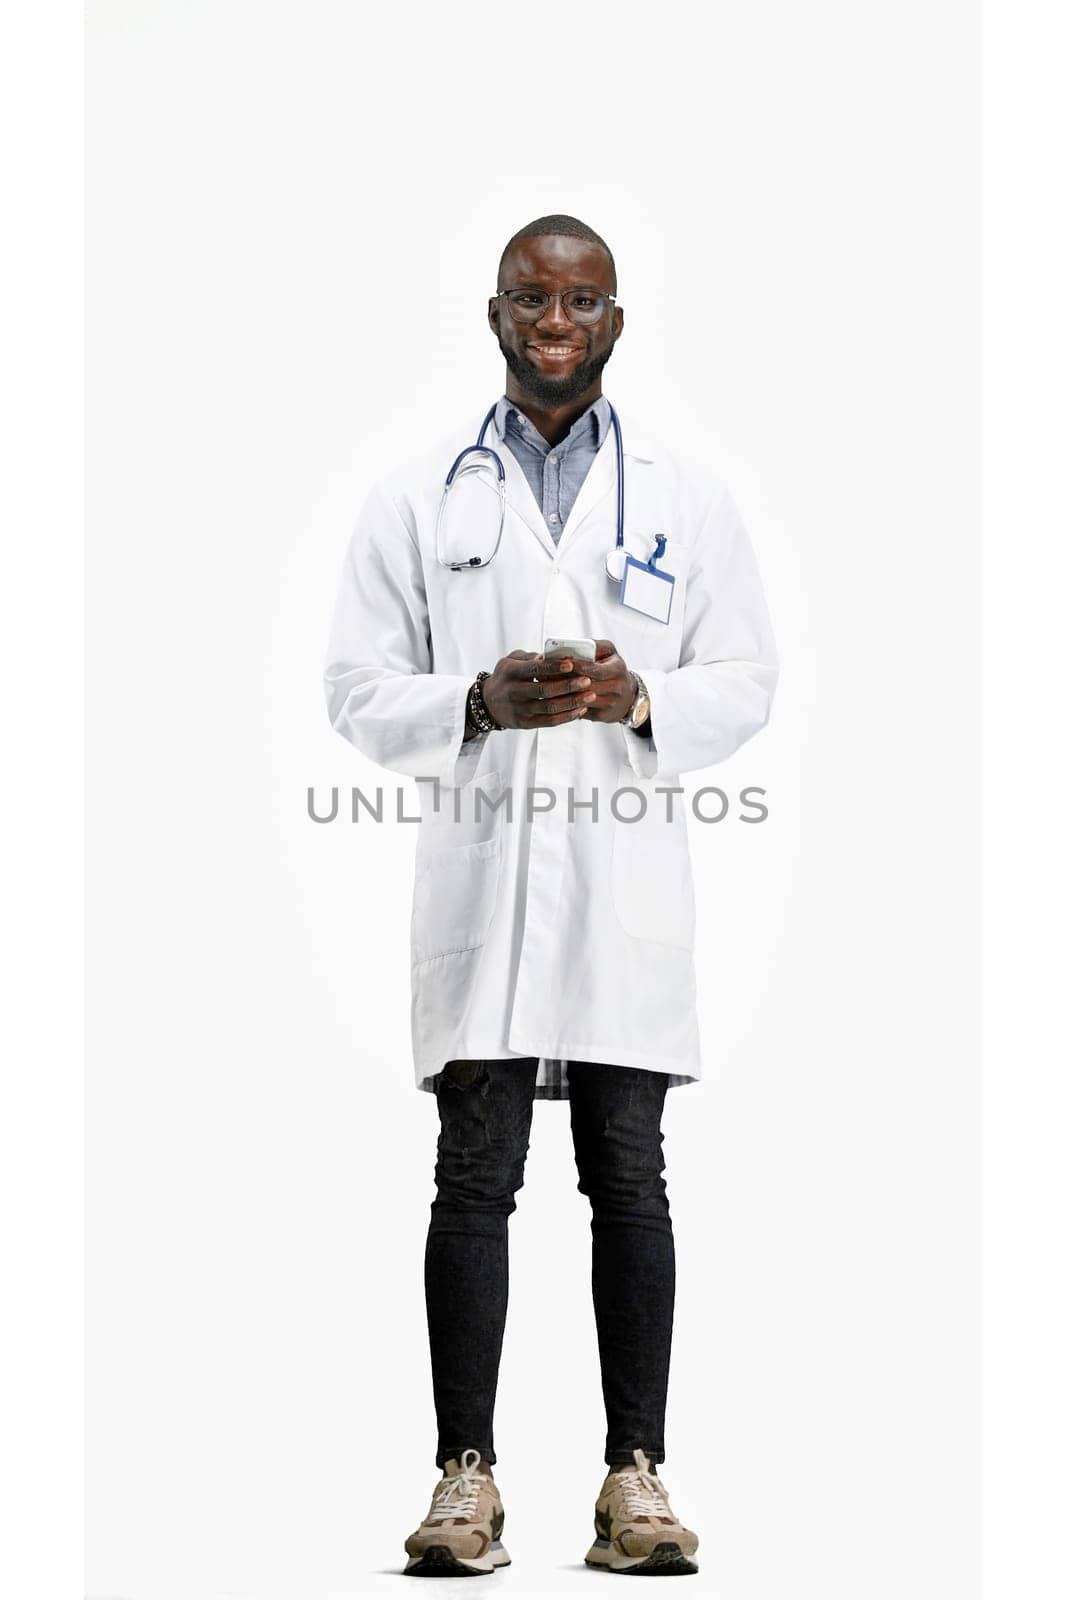 The doctor, in full height, on a white background, uses a phone.